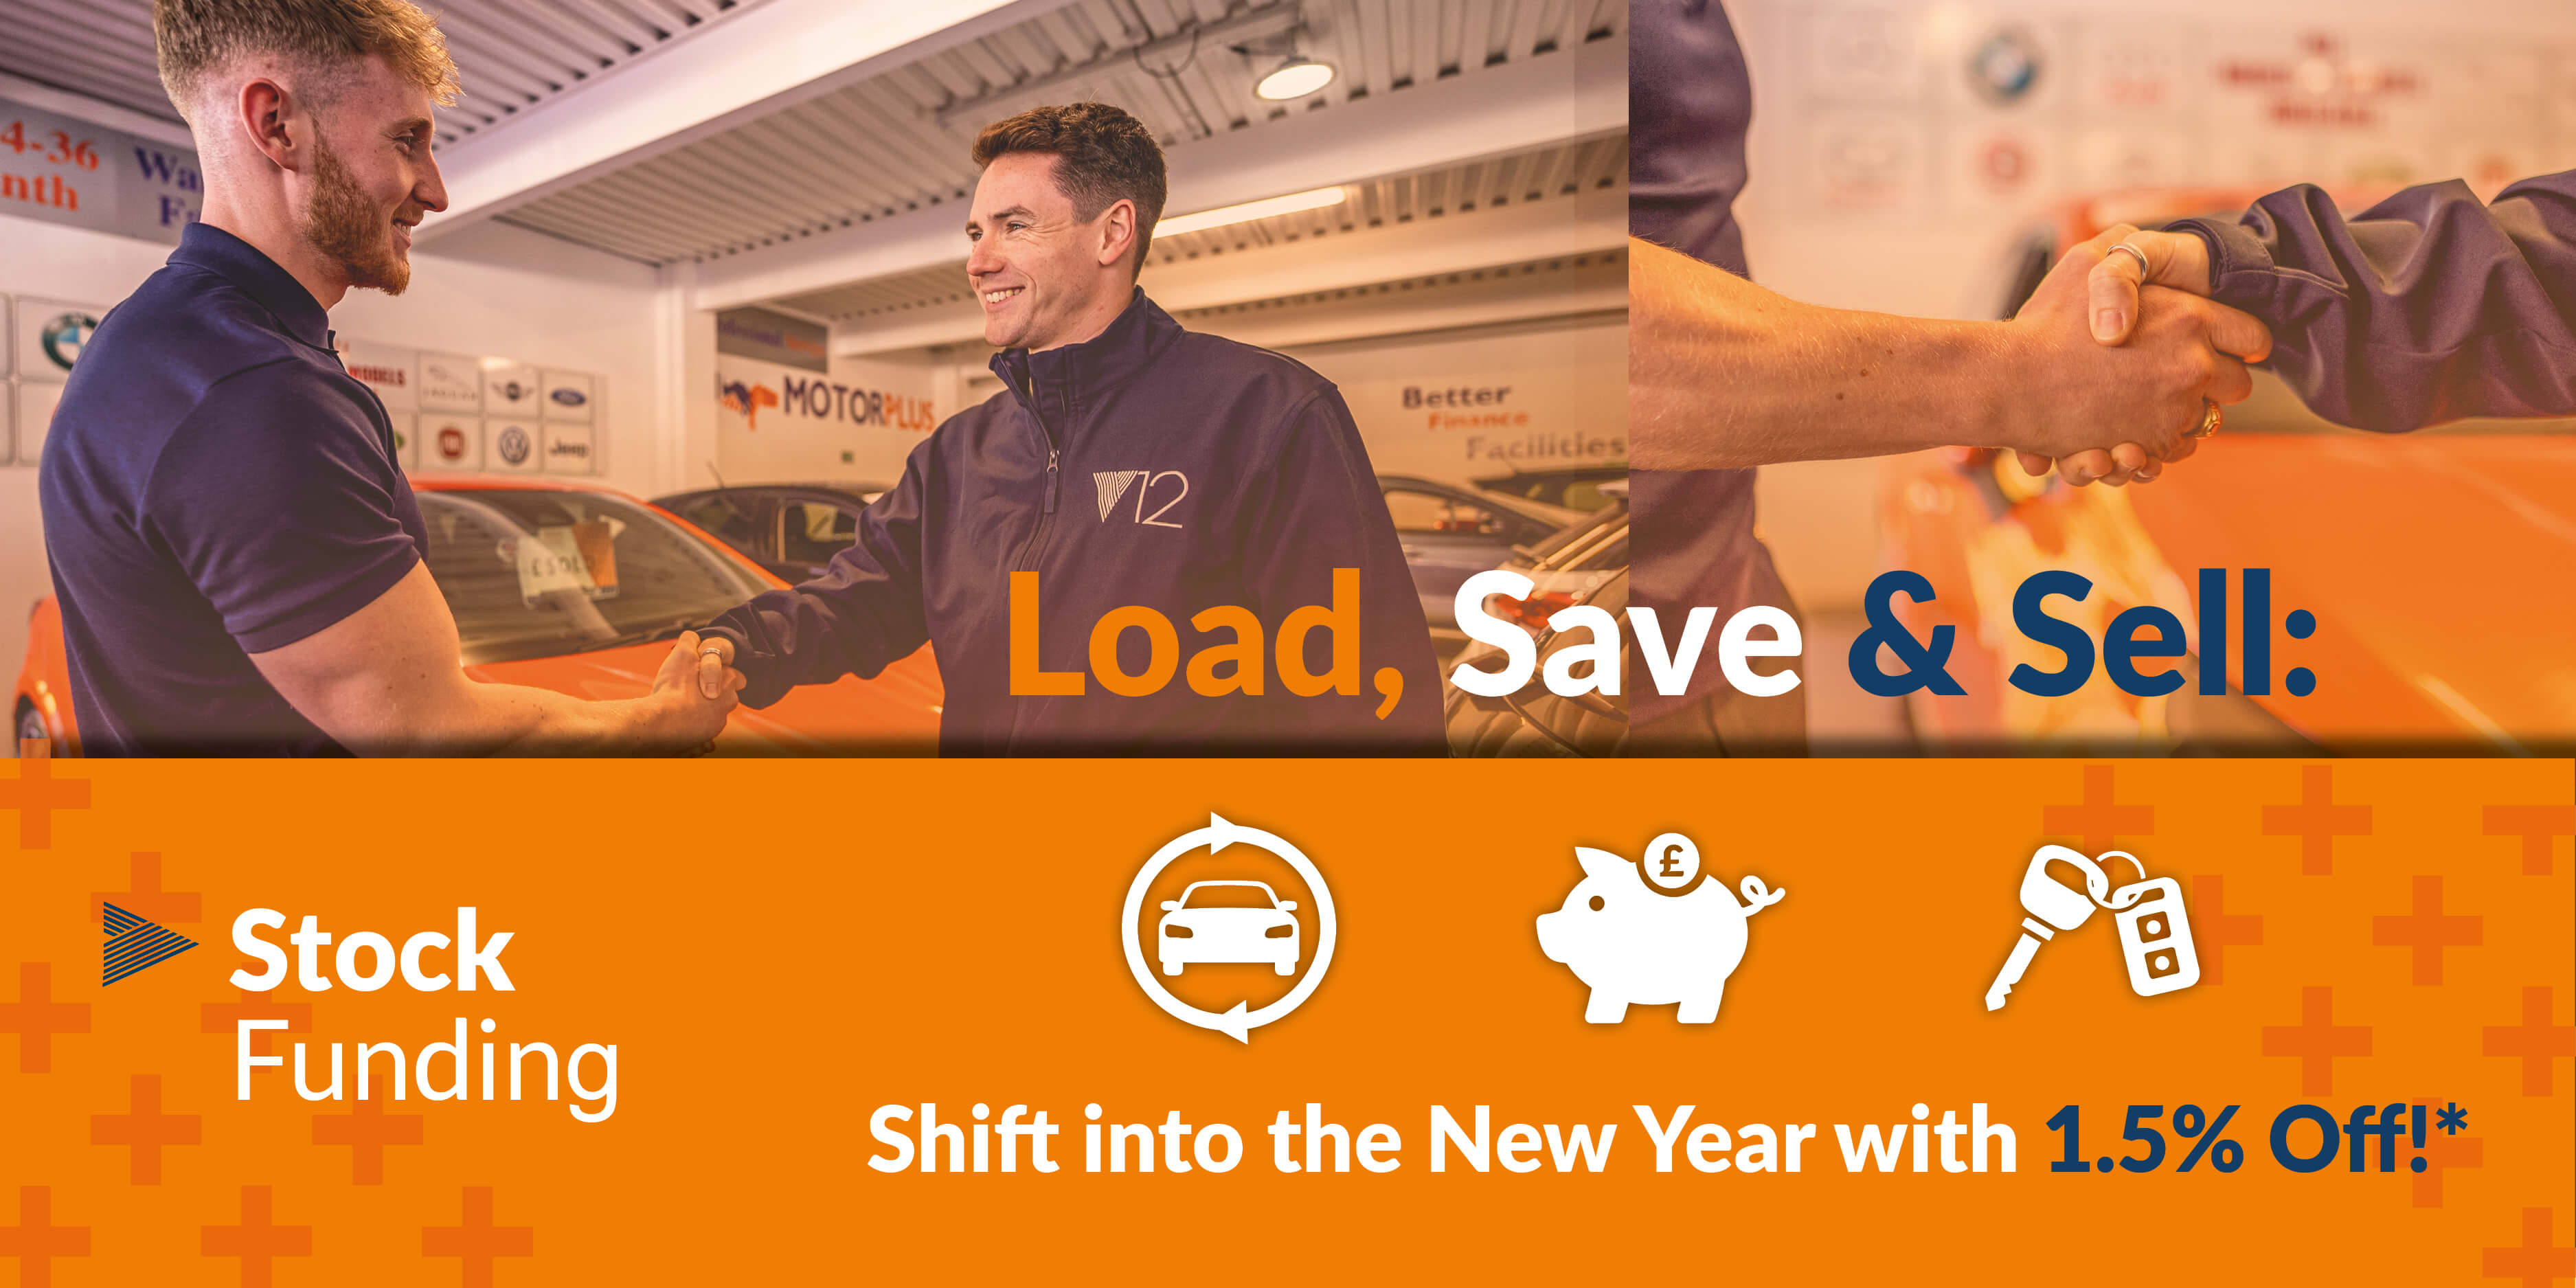 Load, Save & Sell promotion offering 1.5% off for new stock funding customers.